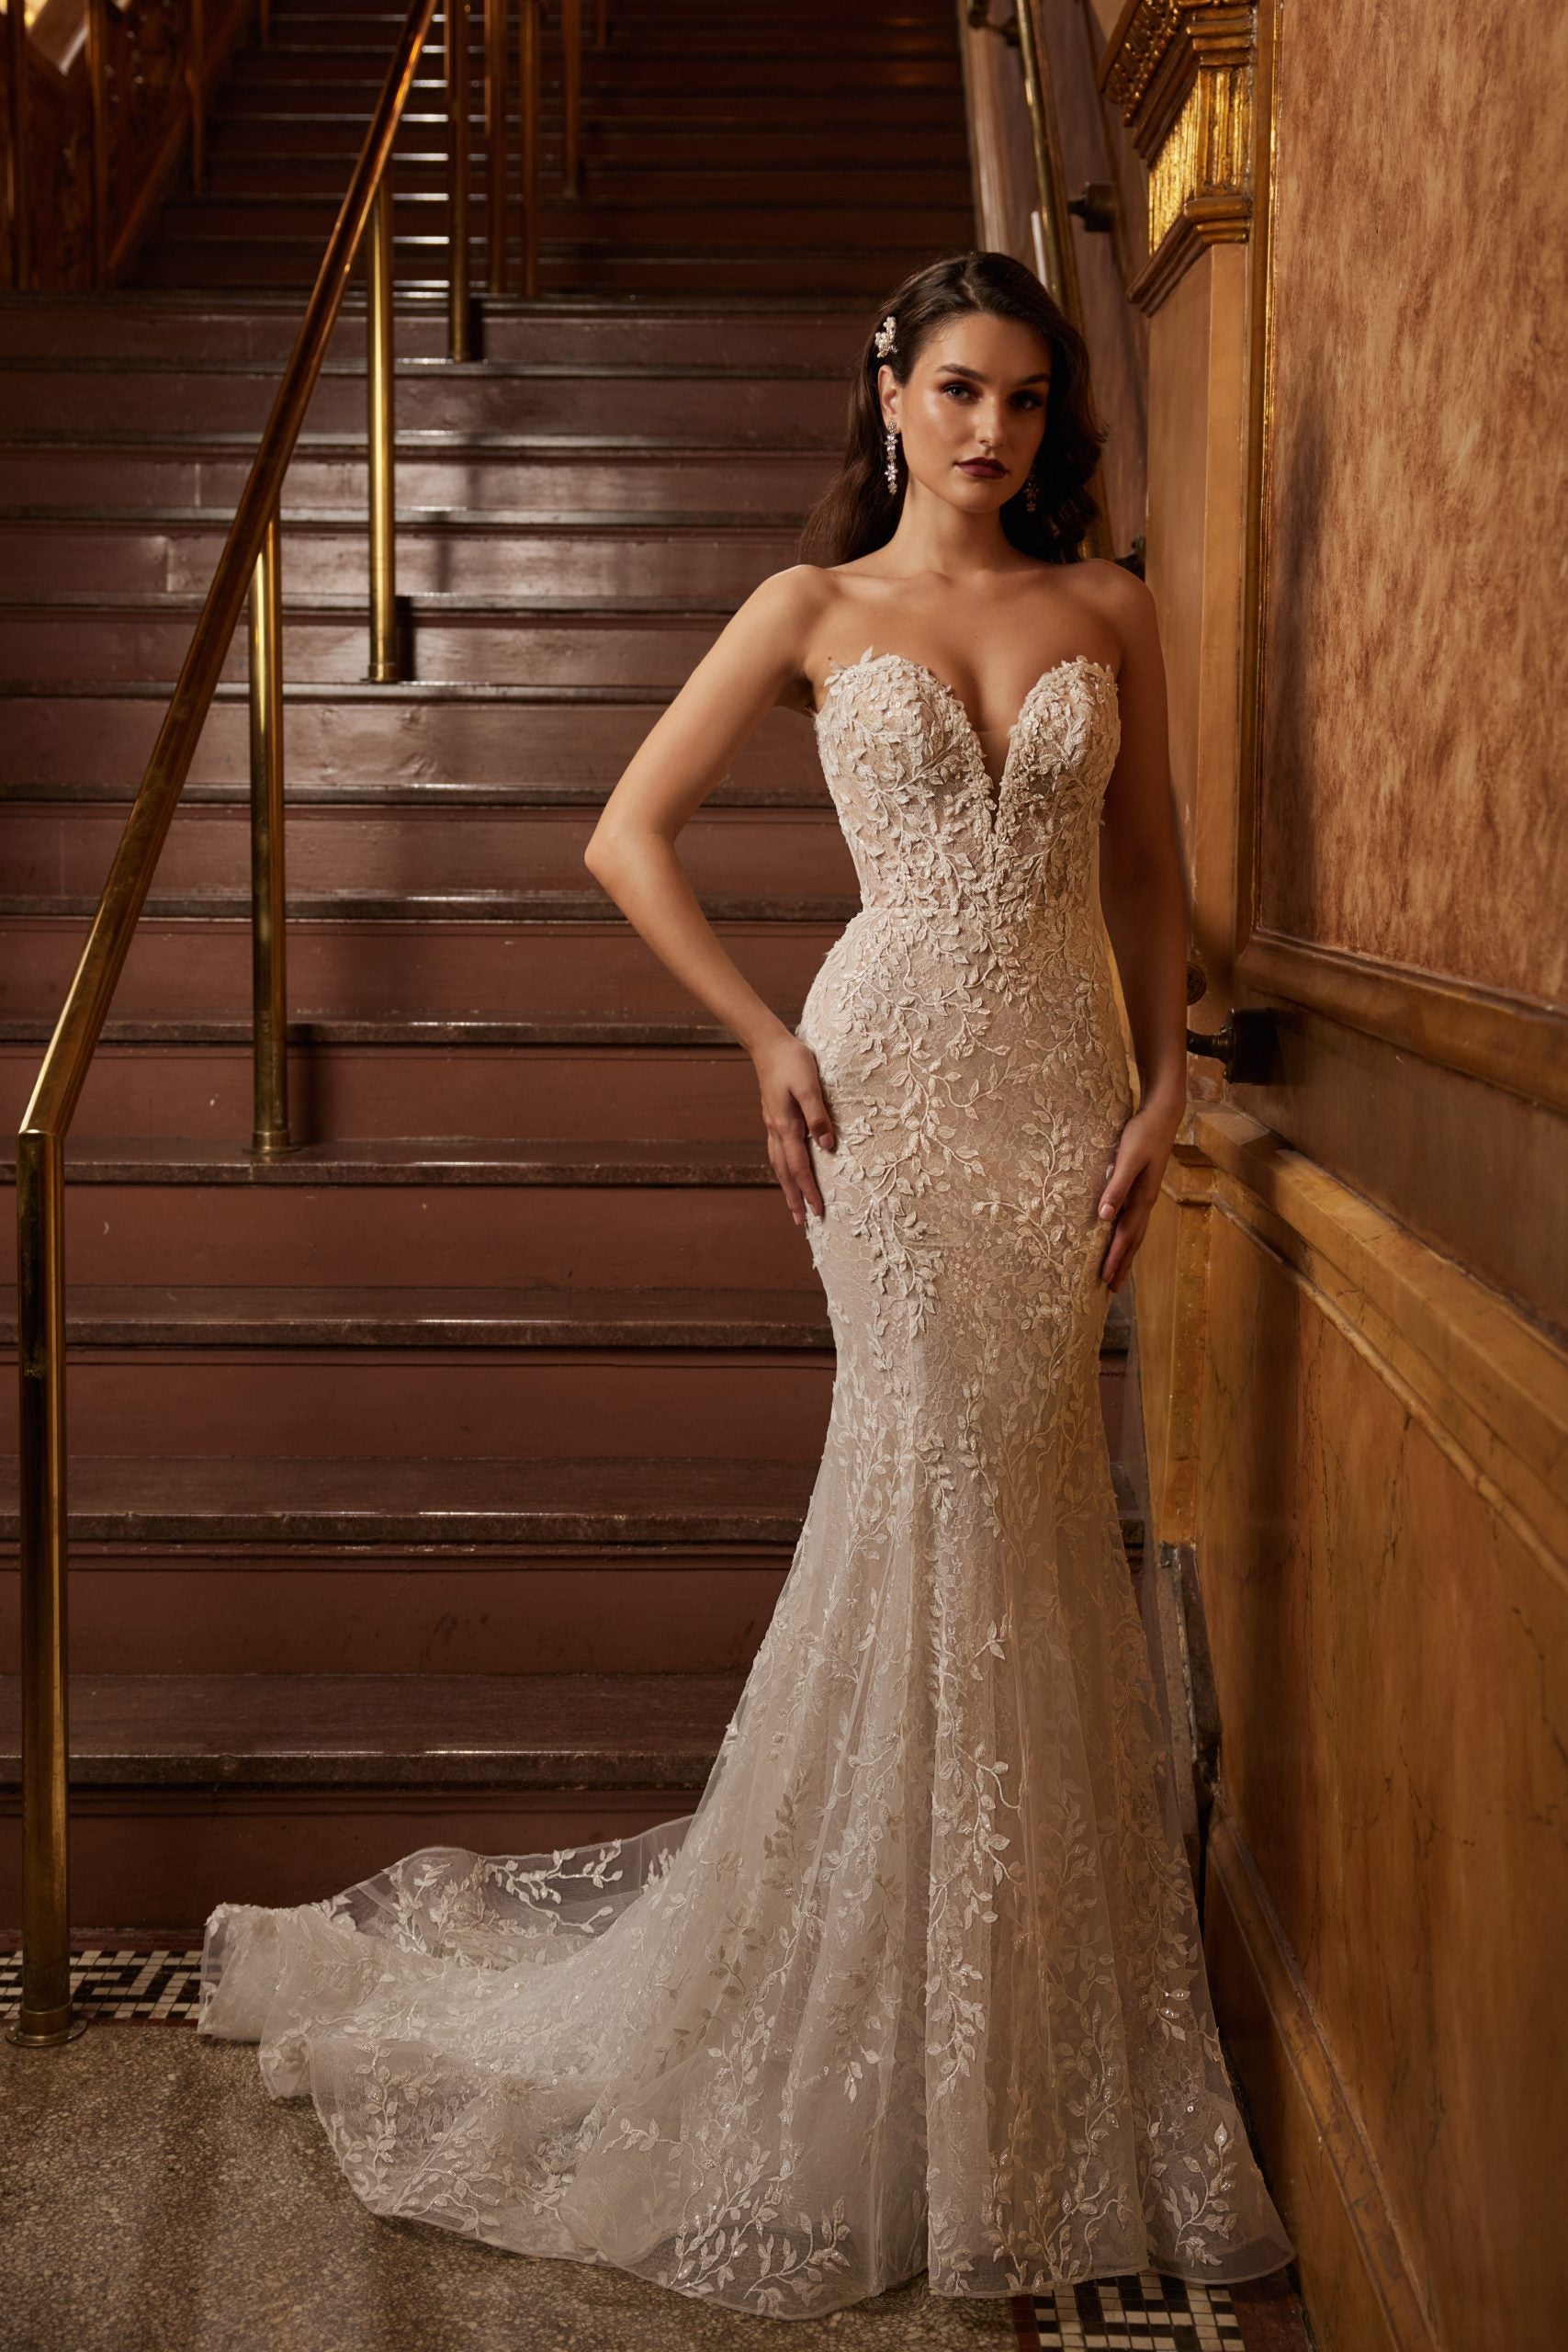 Style 44292: Mikado Ball Gown with Sweetheart Neckline and Exposed Boning |  Sincerity Bridal | Sincerity bridal, Ball gown wedding dress, Ball gowns  wedding